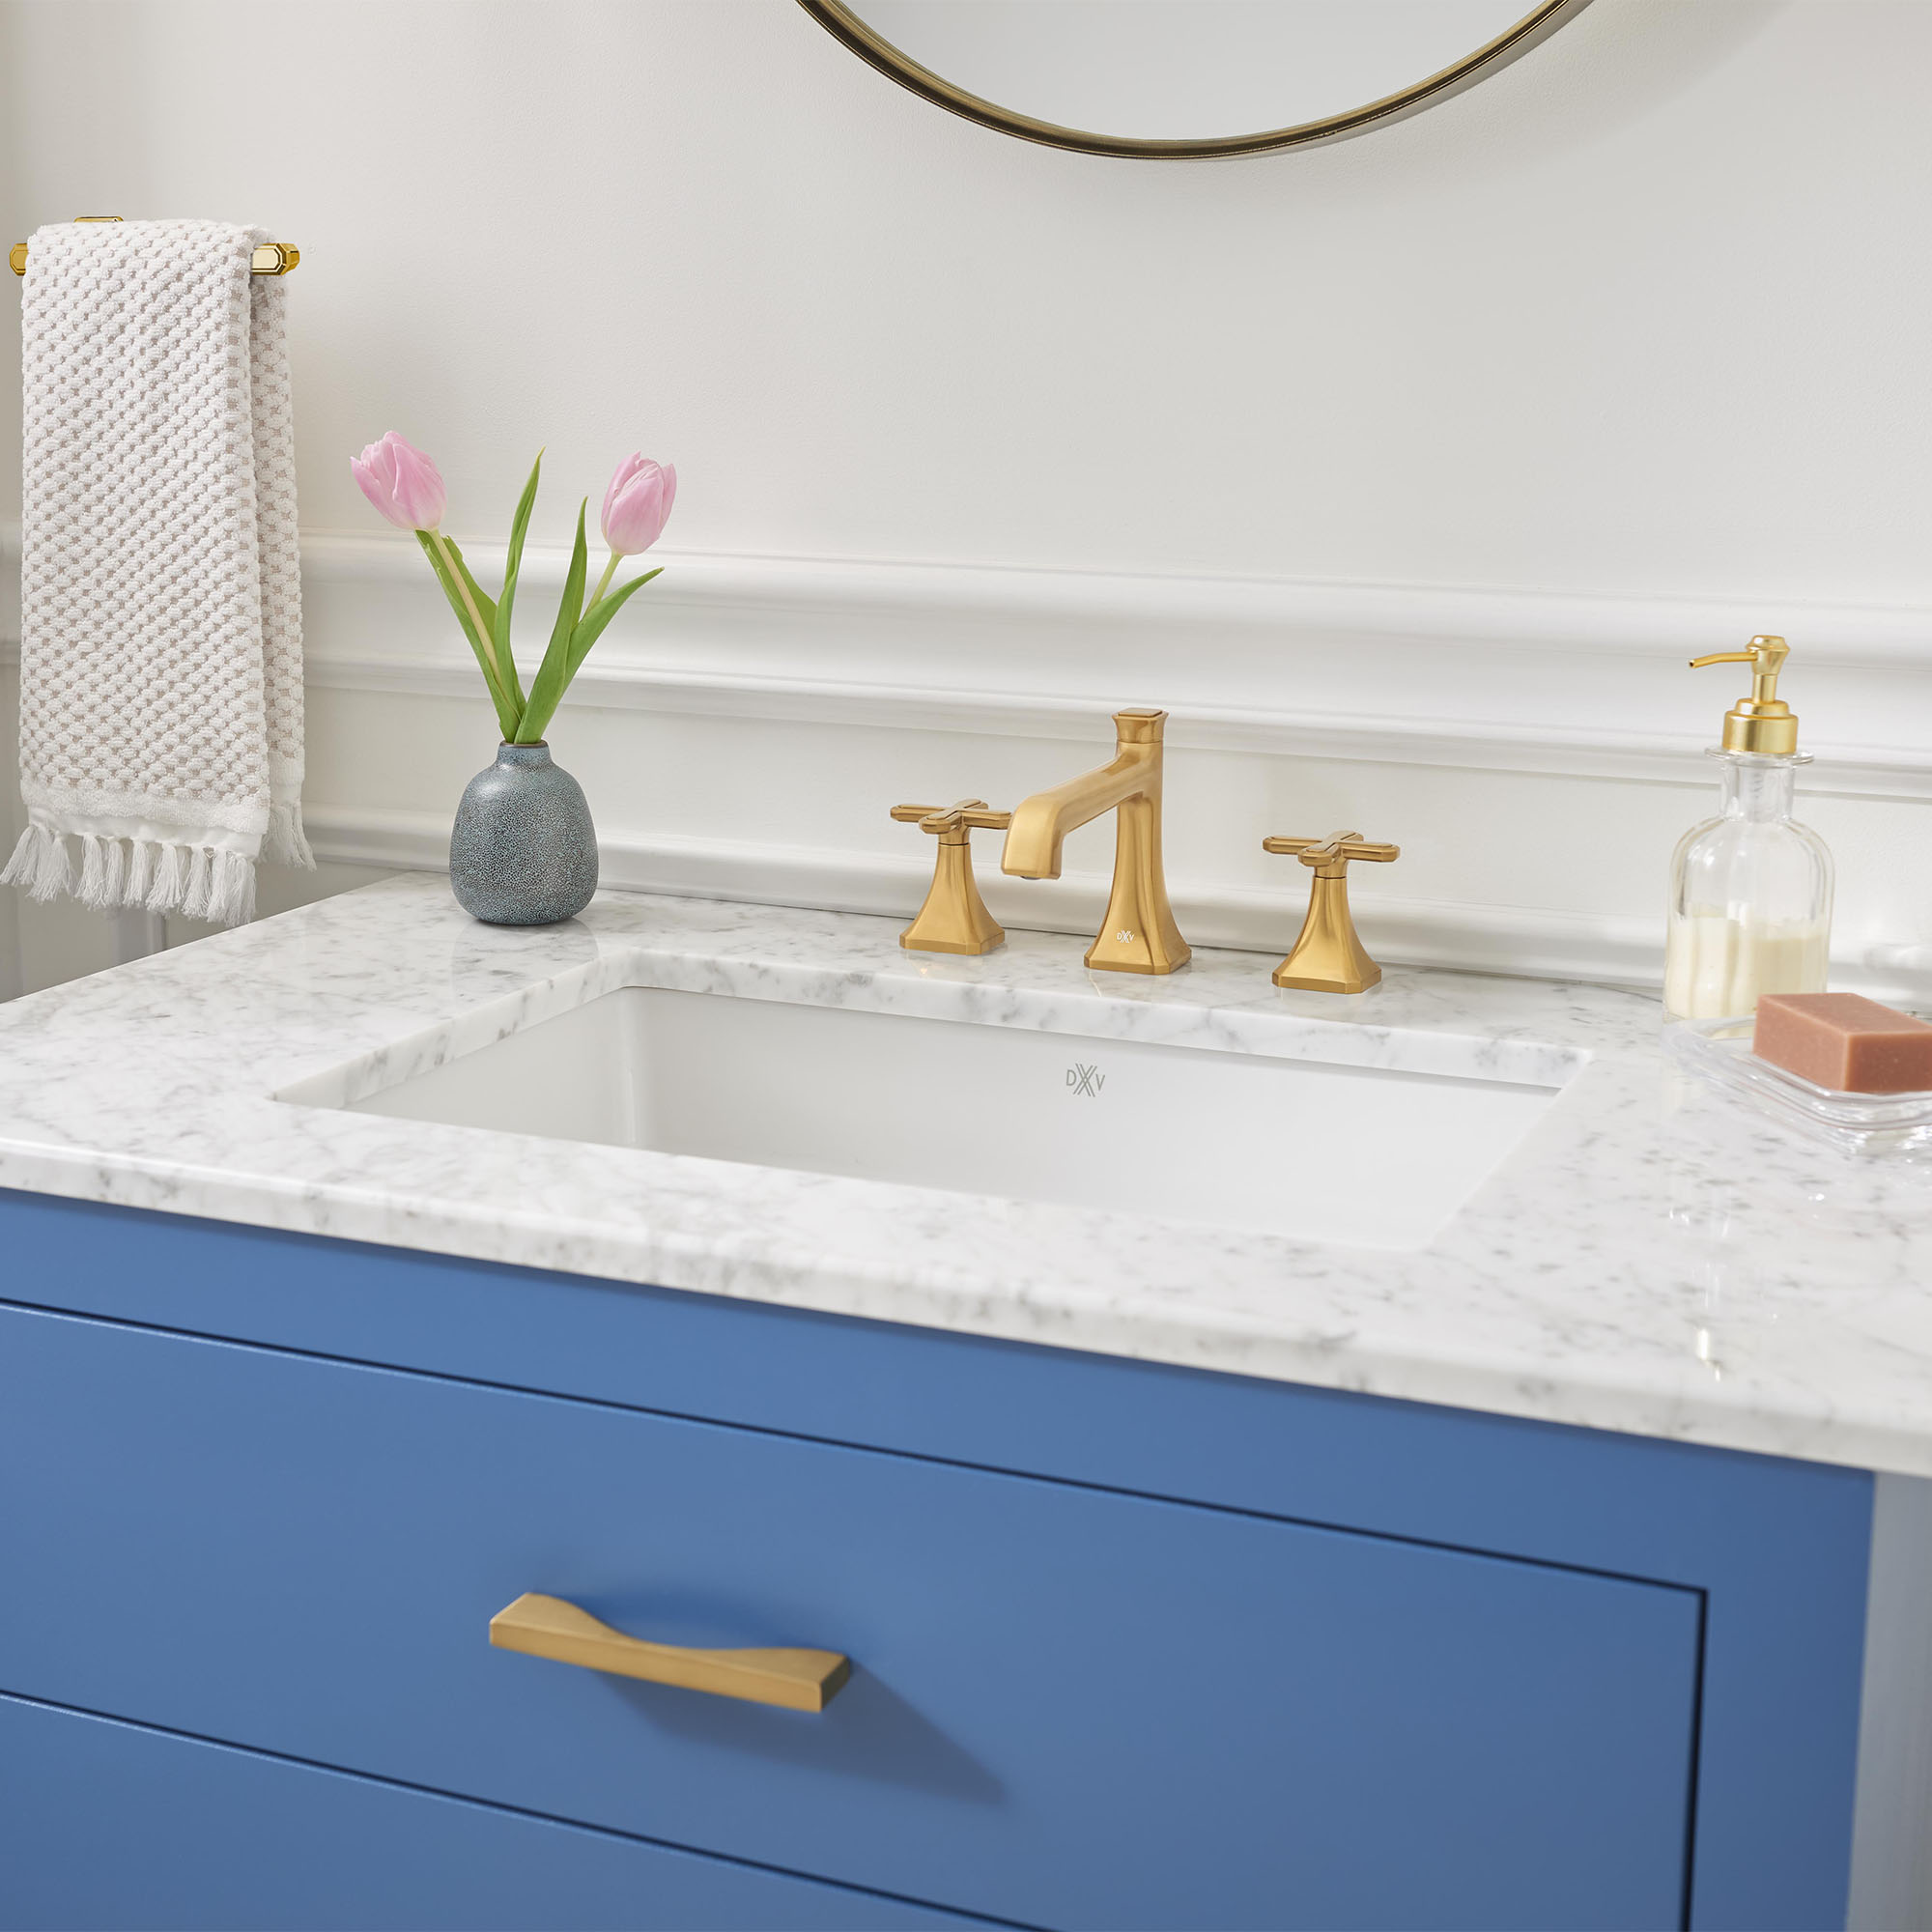 Belshire™ Cross Handles Only for Widespread Bathroom Faucet